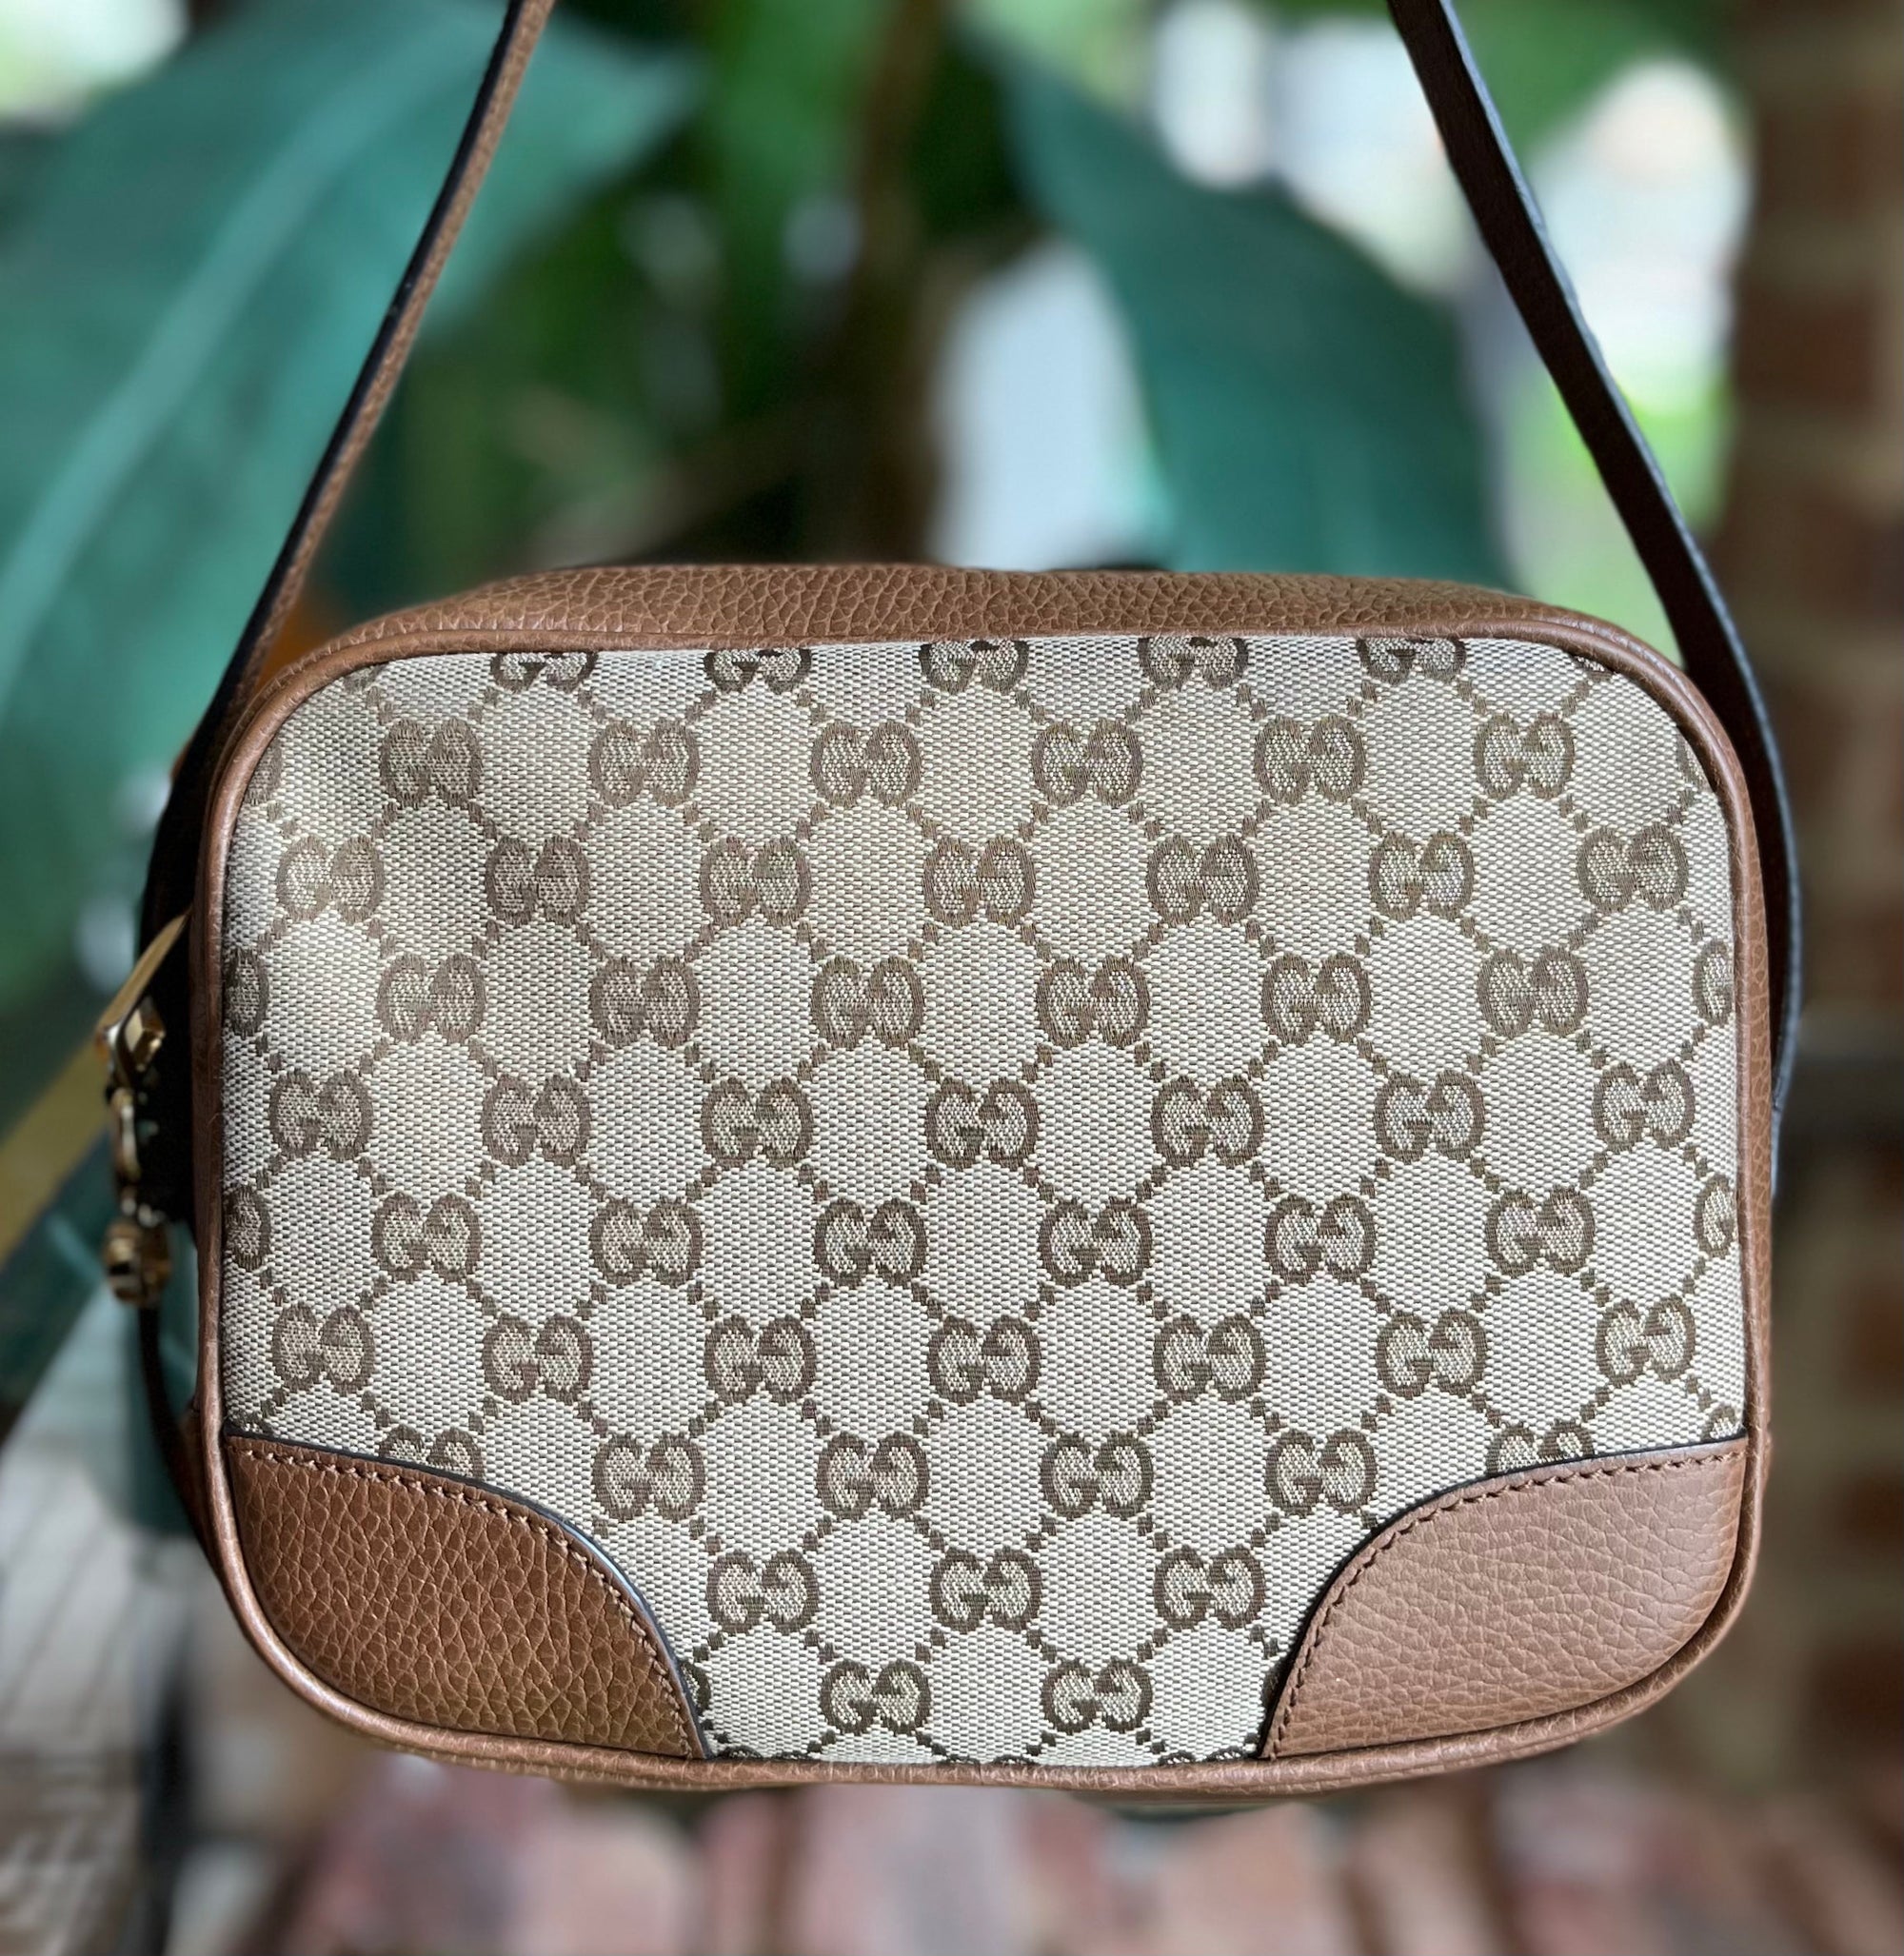 vaskepulver Kvarter Flagermus Authentic Gucci Bags, Shoes and Accessories - The Purse Ladies